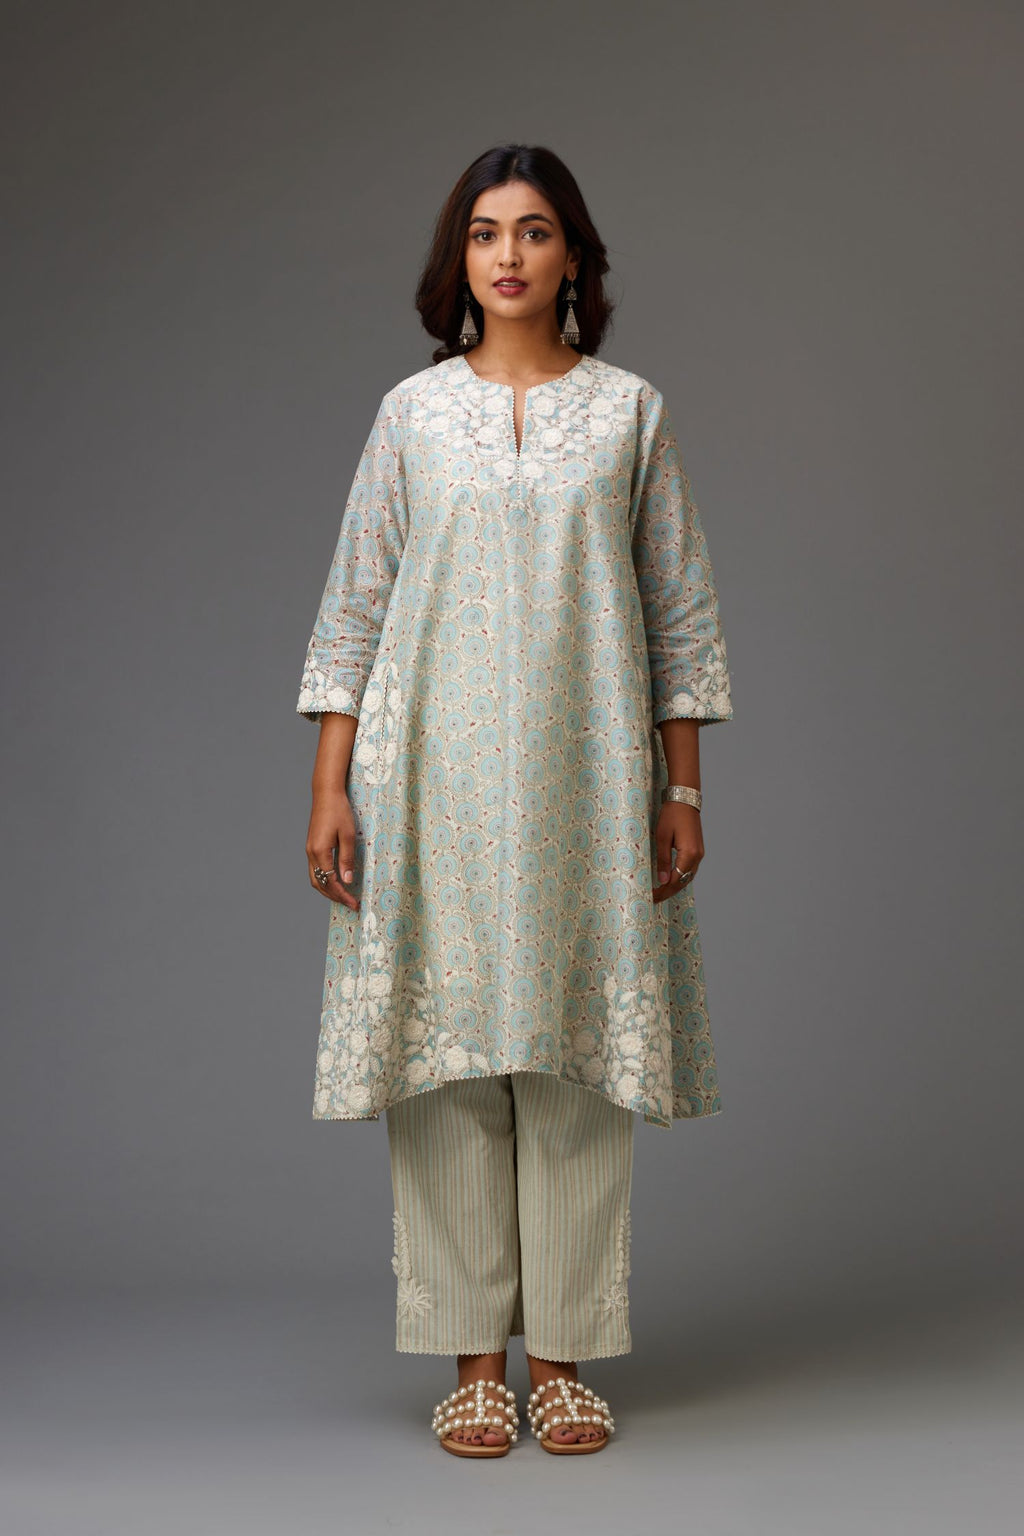 Blue & grey hand block printed short A-line kurta set with appliqué embroidery, highlighted with ric rac lace and sequins.